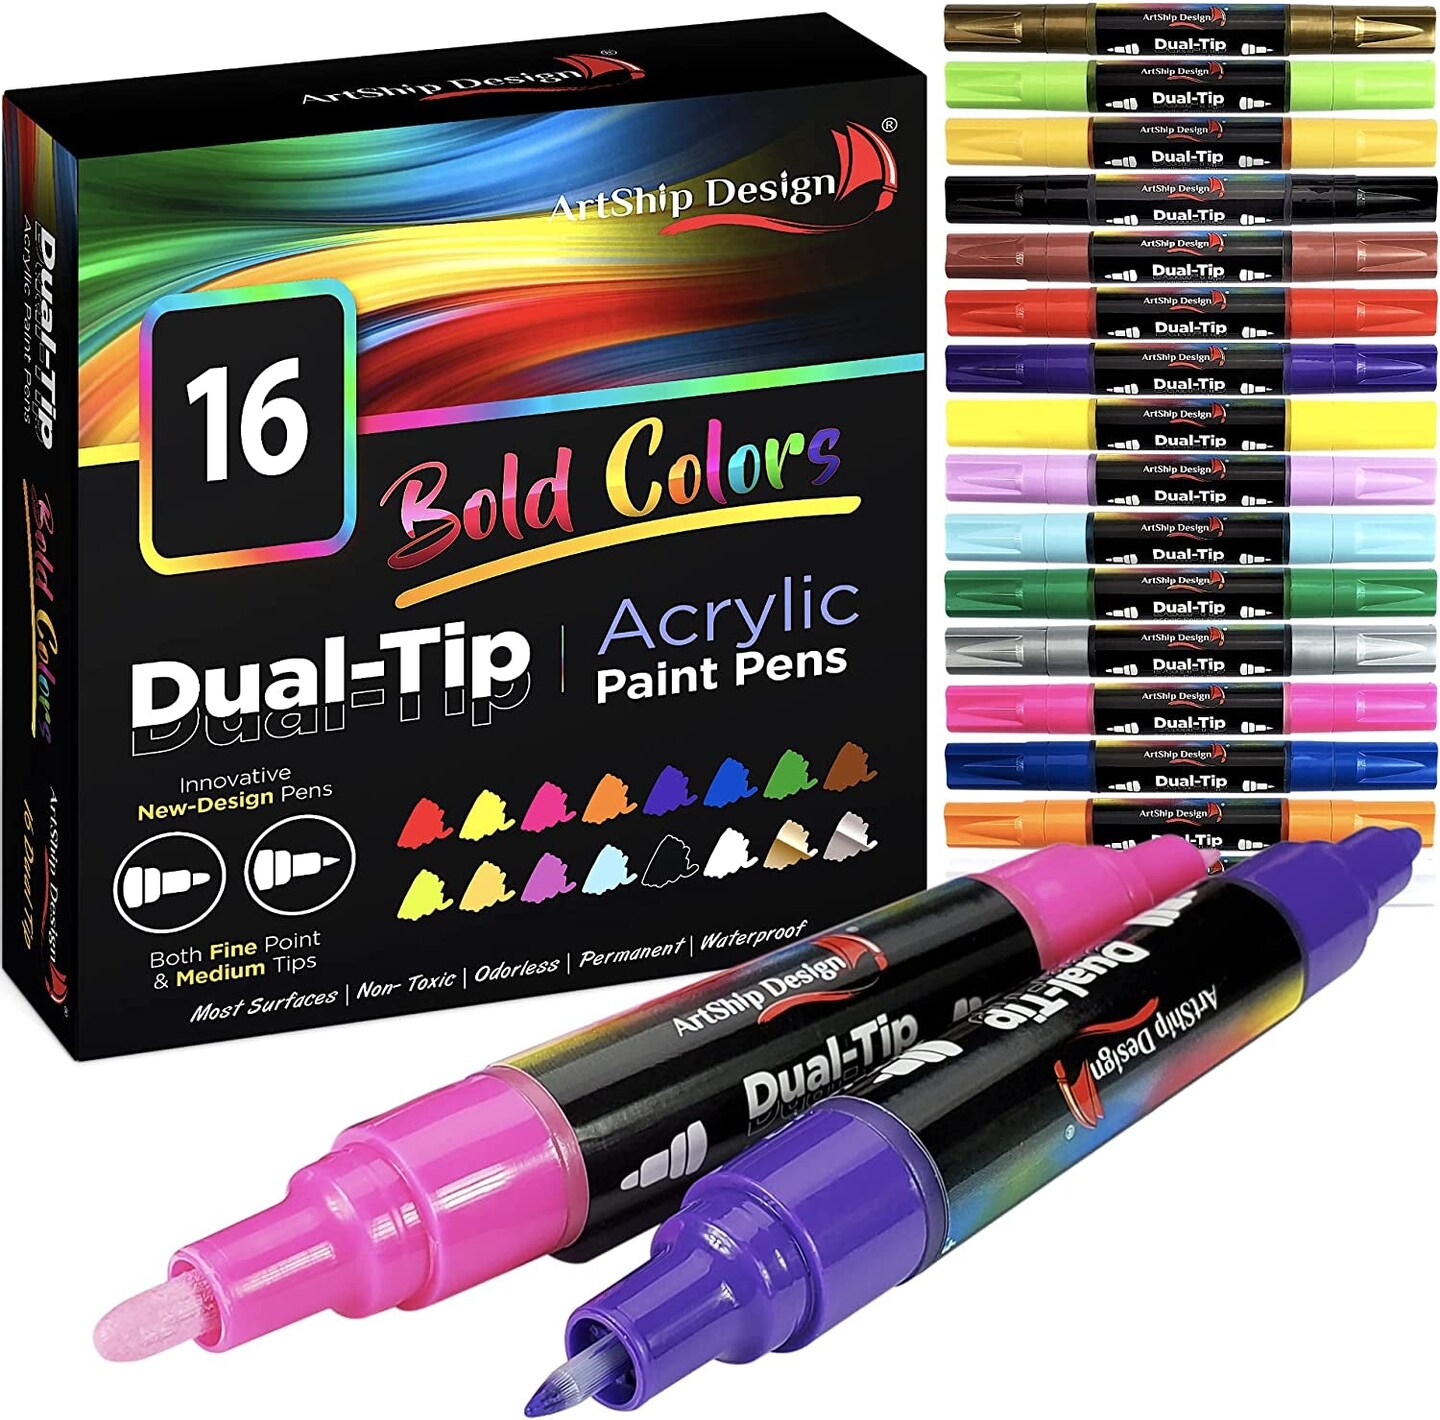 Glow in the Dark Painting Markers - High Quality and Non-toxic